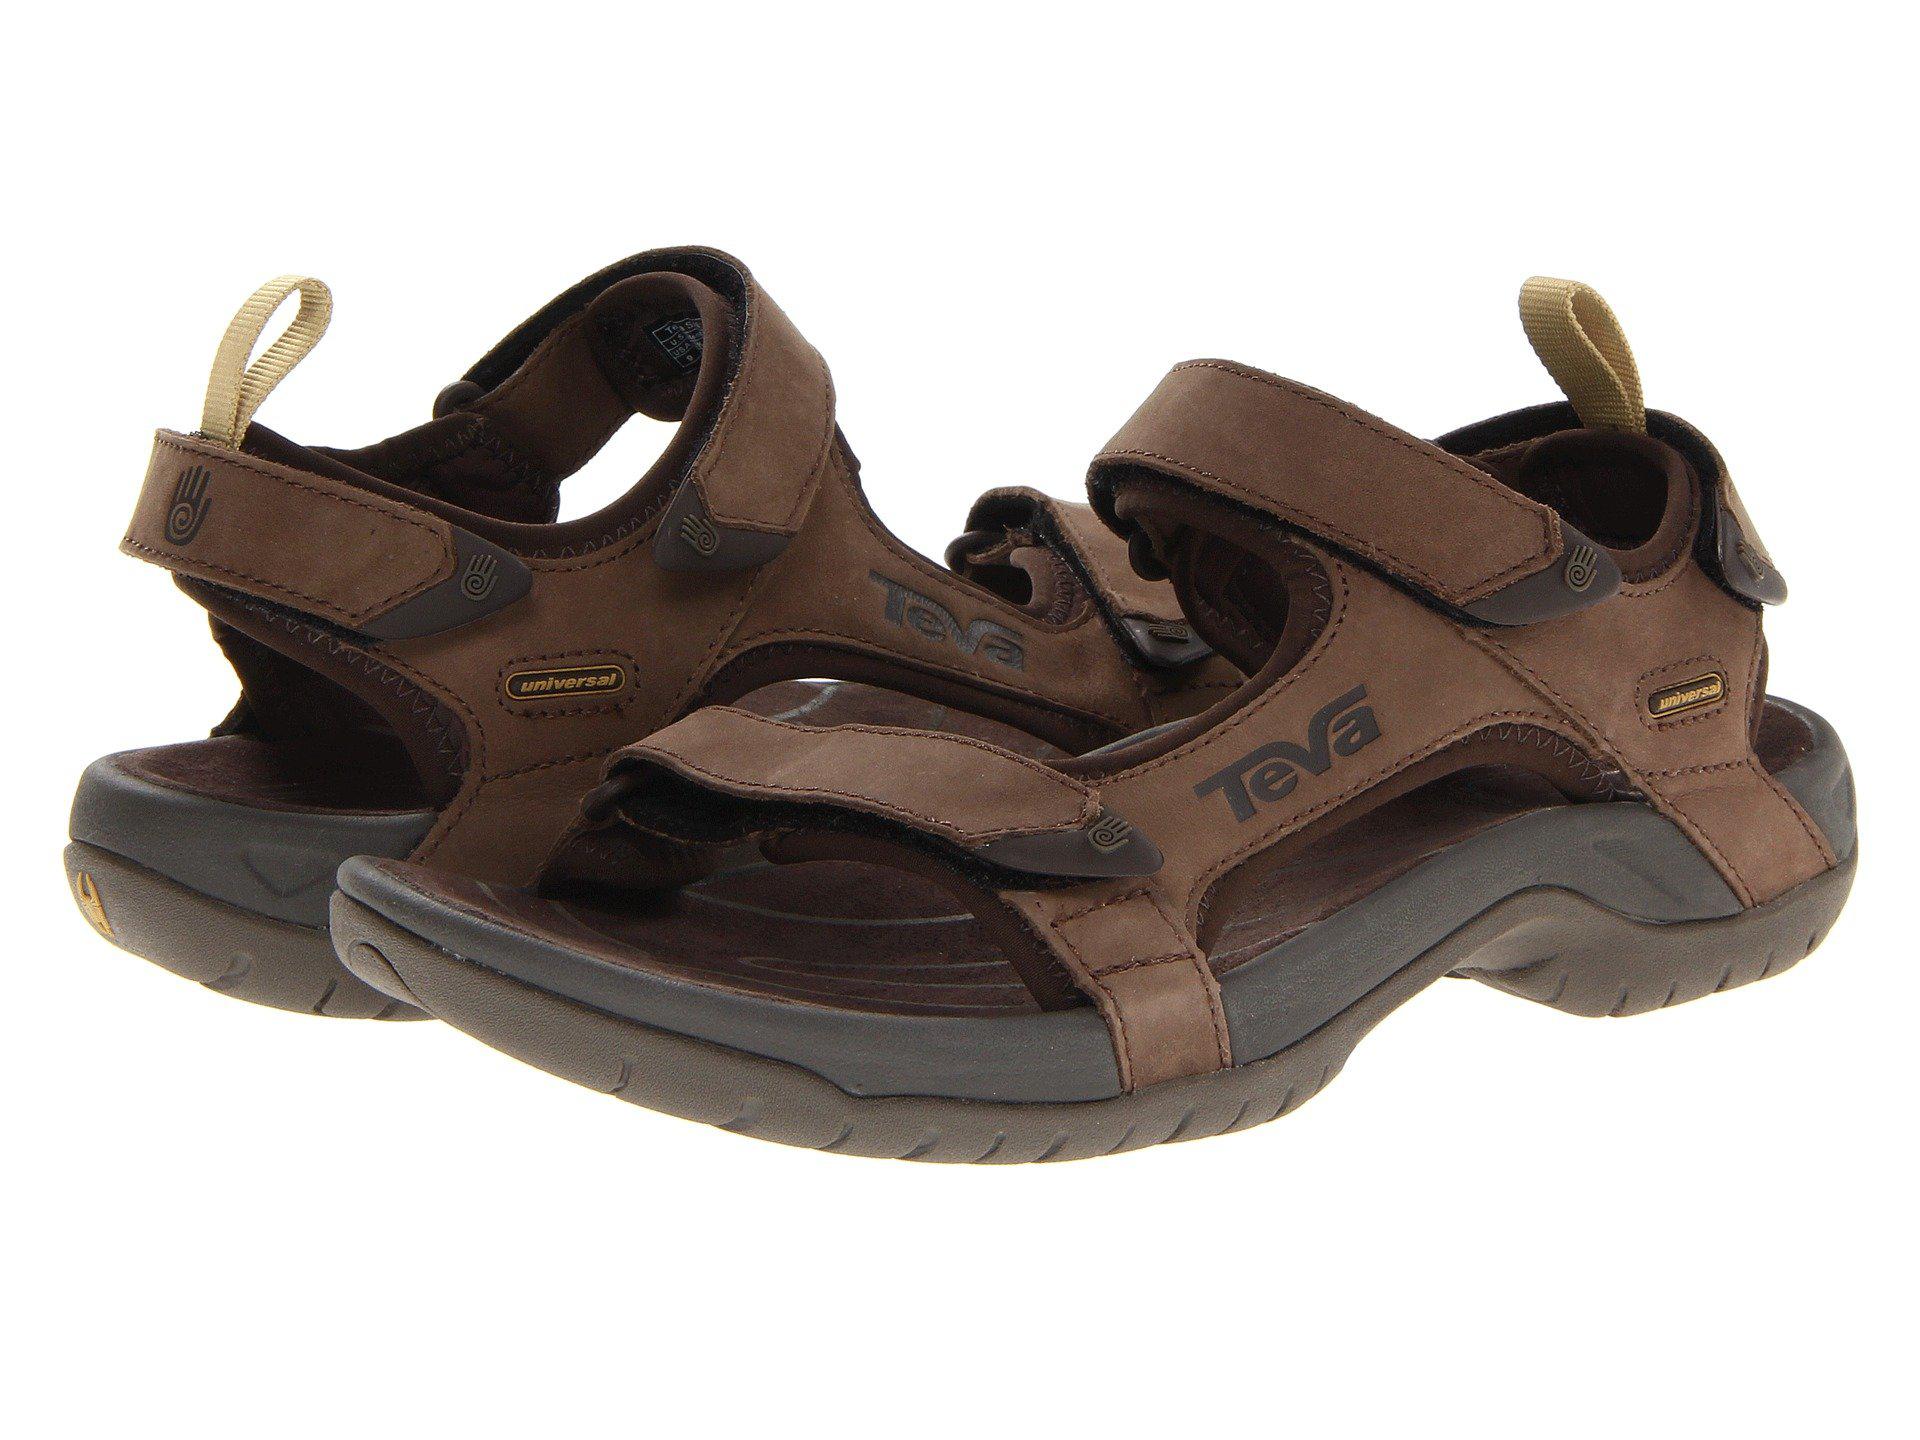 KYANIA Men's Leather Sandals